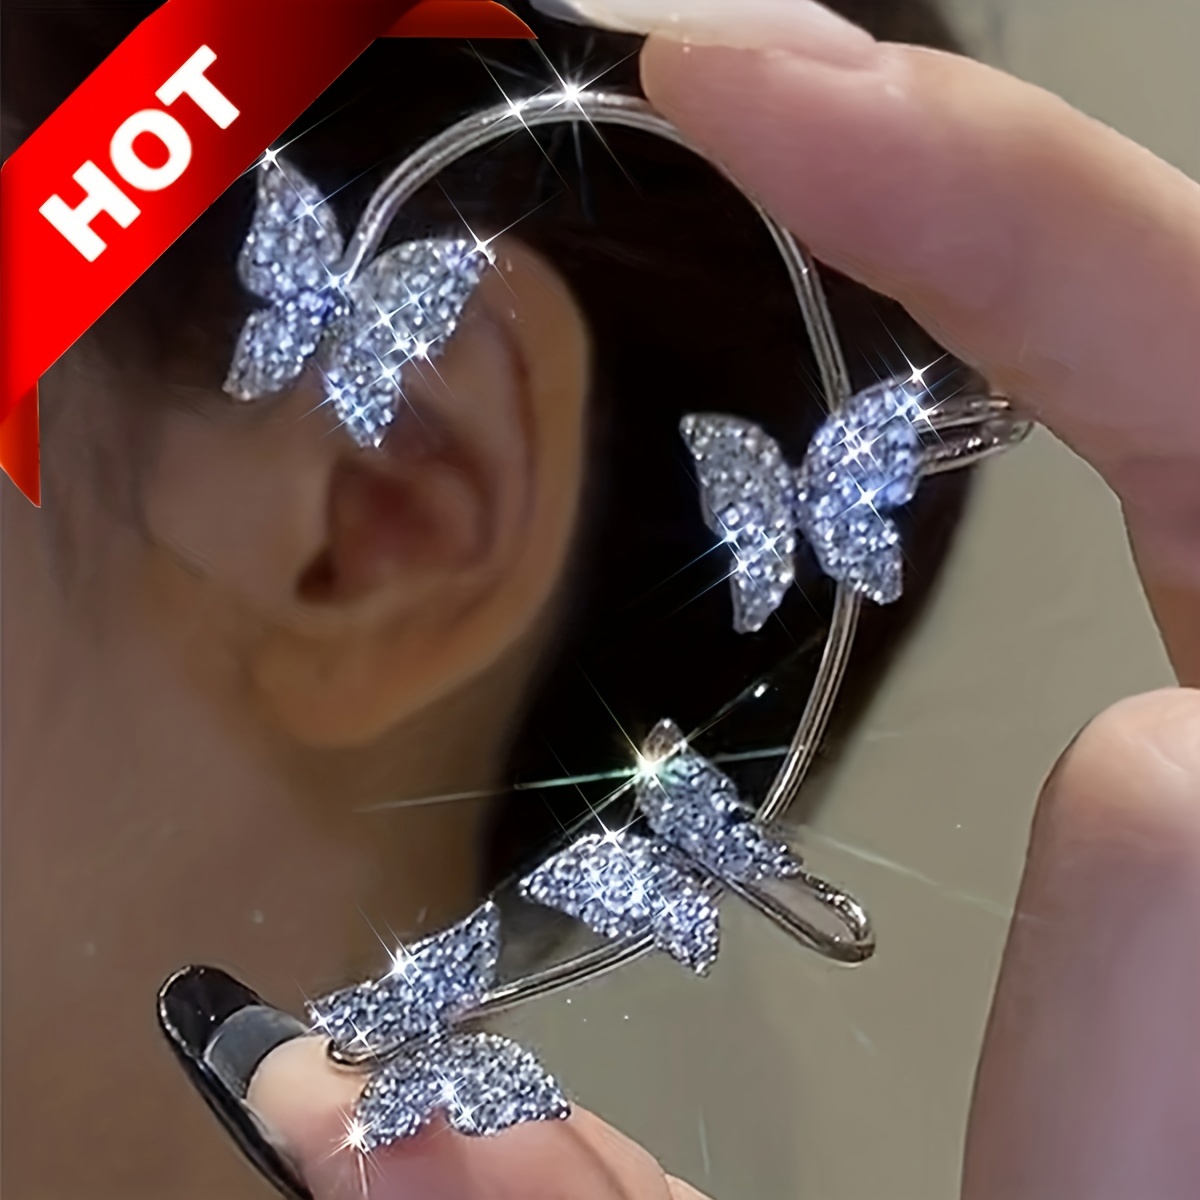 1 Pair Shiny Butterfly Ear Cuff, Zircon Decor Cute Animal Japanese and Korean Style Ear Cuff, No Piercing, Earring Jewelry, Jewels Gifts for Women